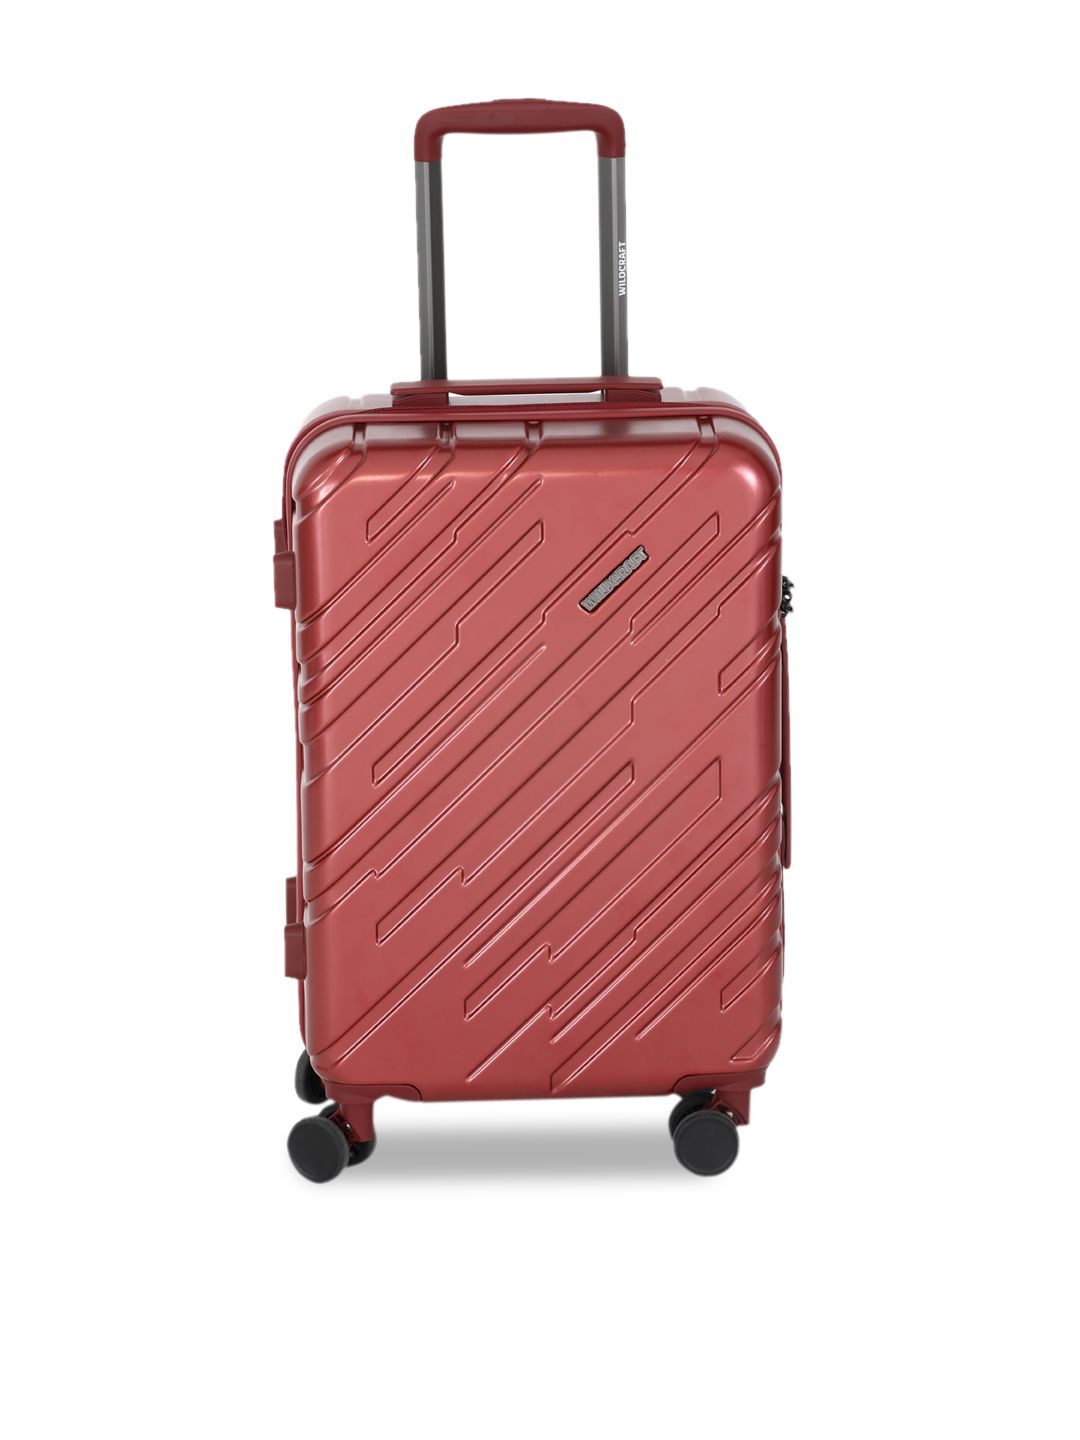 Wildcraft Red Textured Hard-Sided Large Trolley Suitcase Price in India